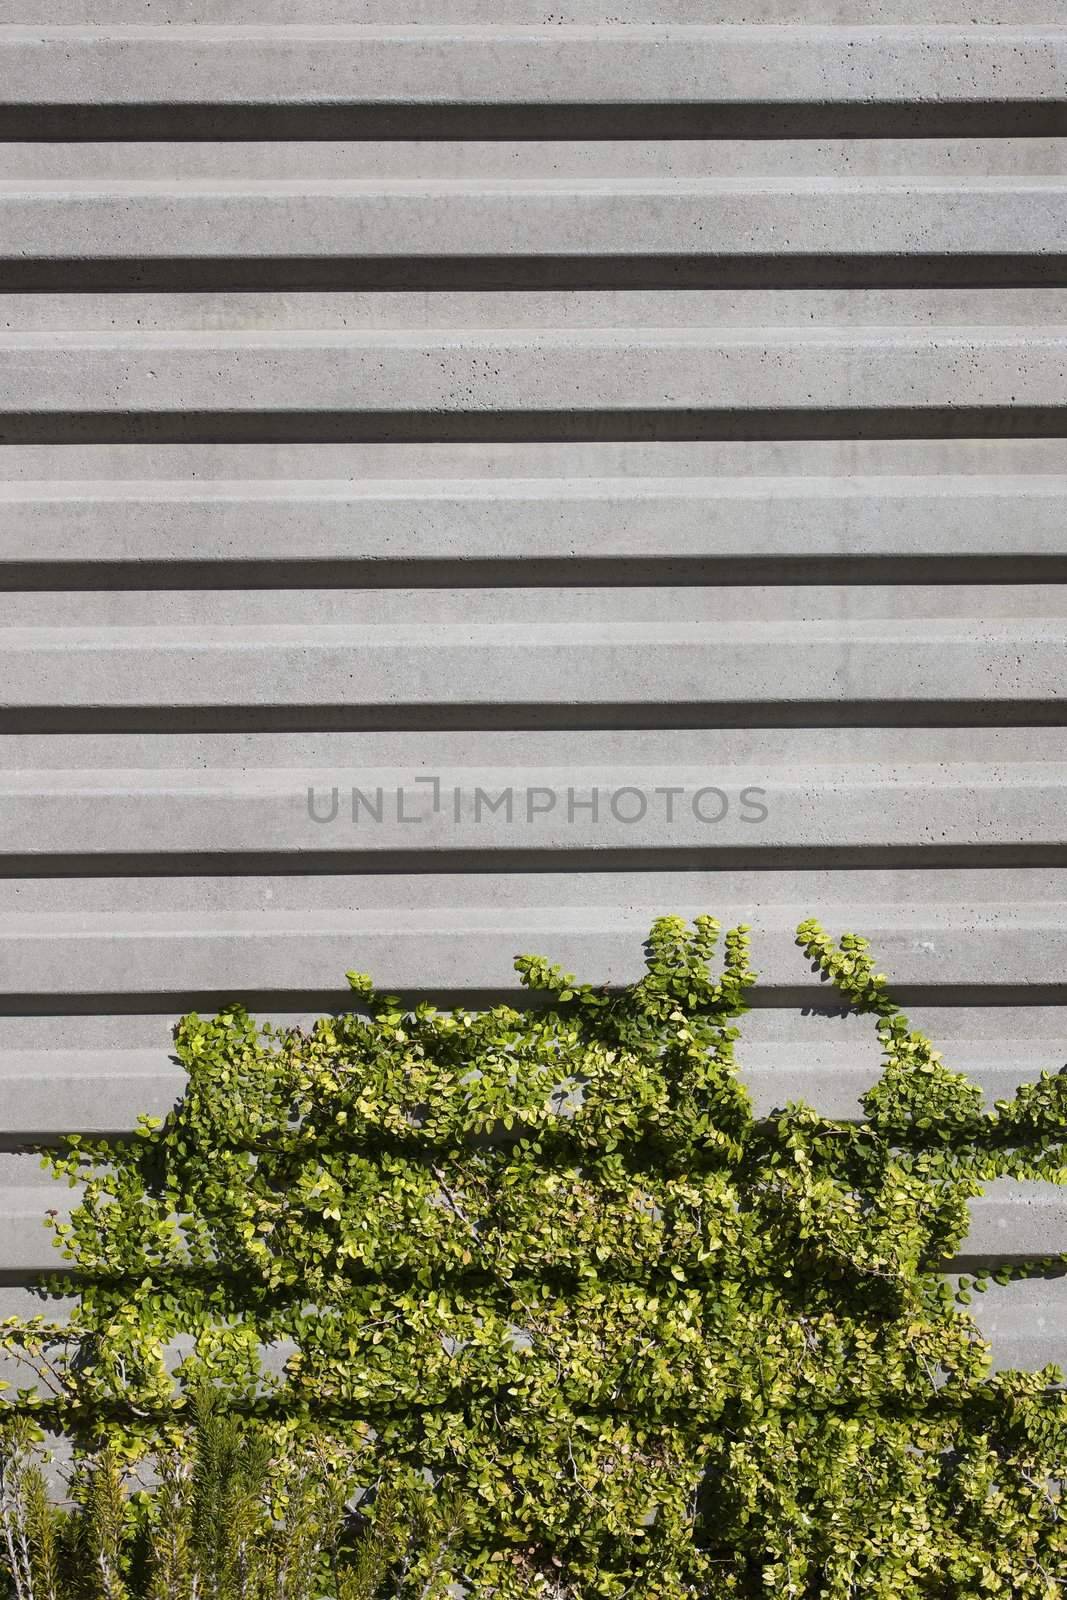 Closeup of Parallel Lines of a Concrete Wall With Vegetation Growing at Bottom